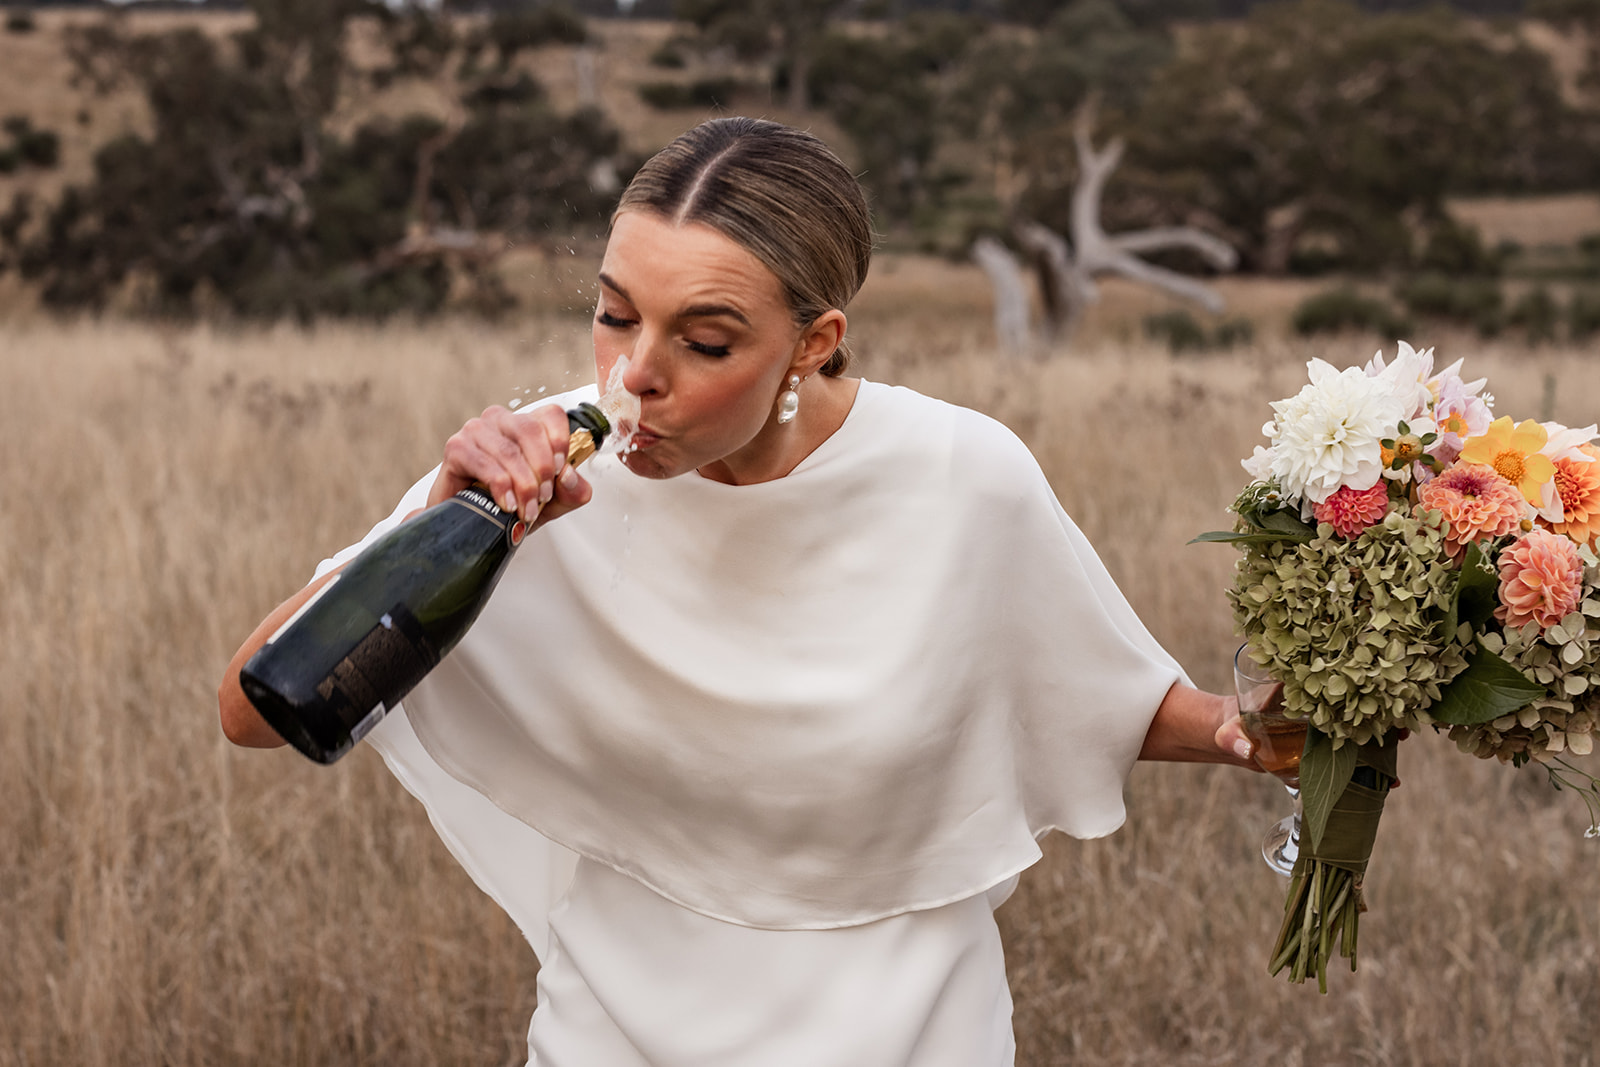 A Bride spills some champagne while taking a drink